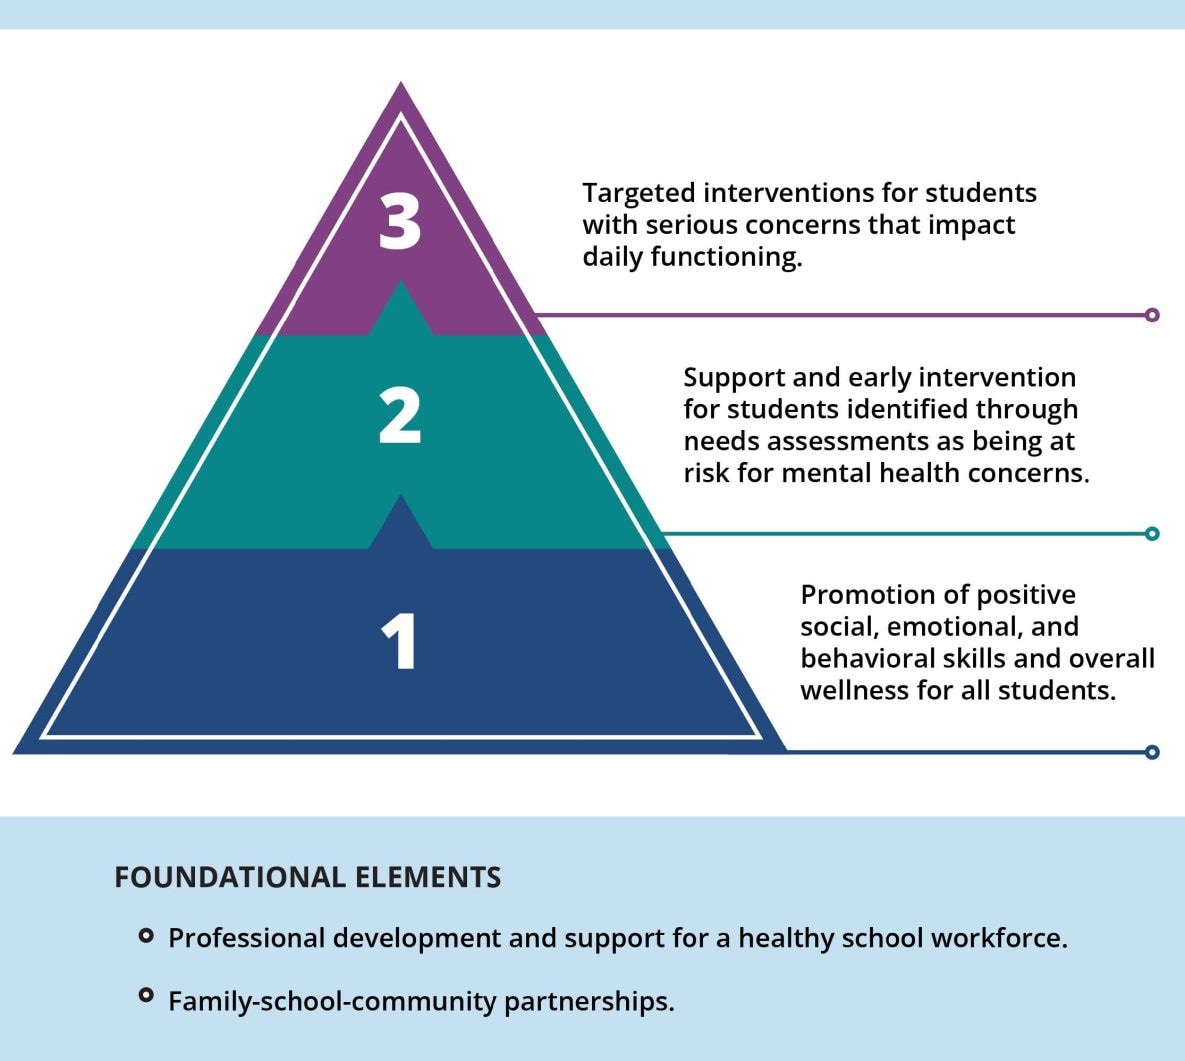 Multitiered Systems of Support (MTSS) are used by many schools and districts to support different levels of students’ needs